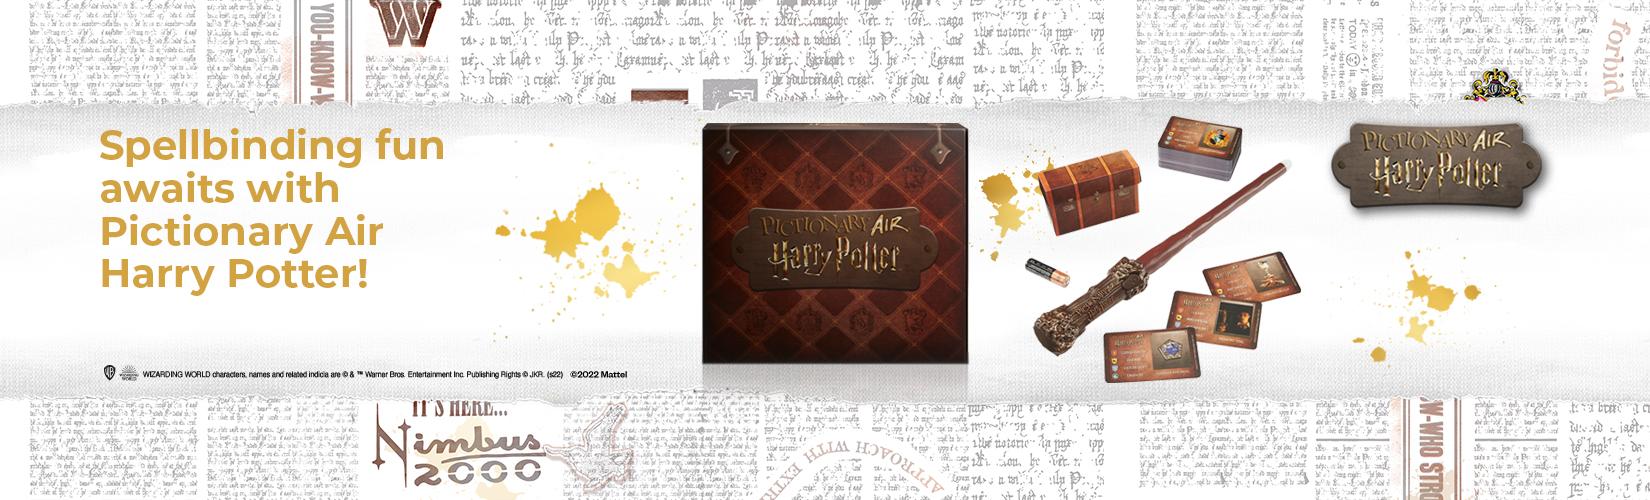 Spellbinding fun awaits with Pictionary Air Harry Potter.